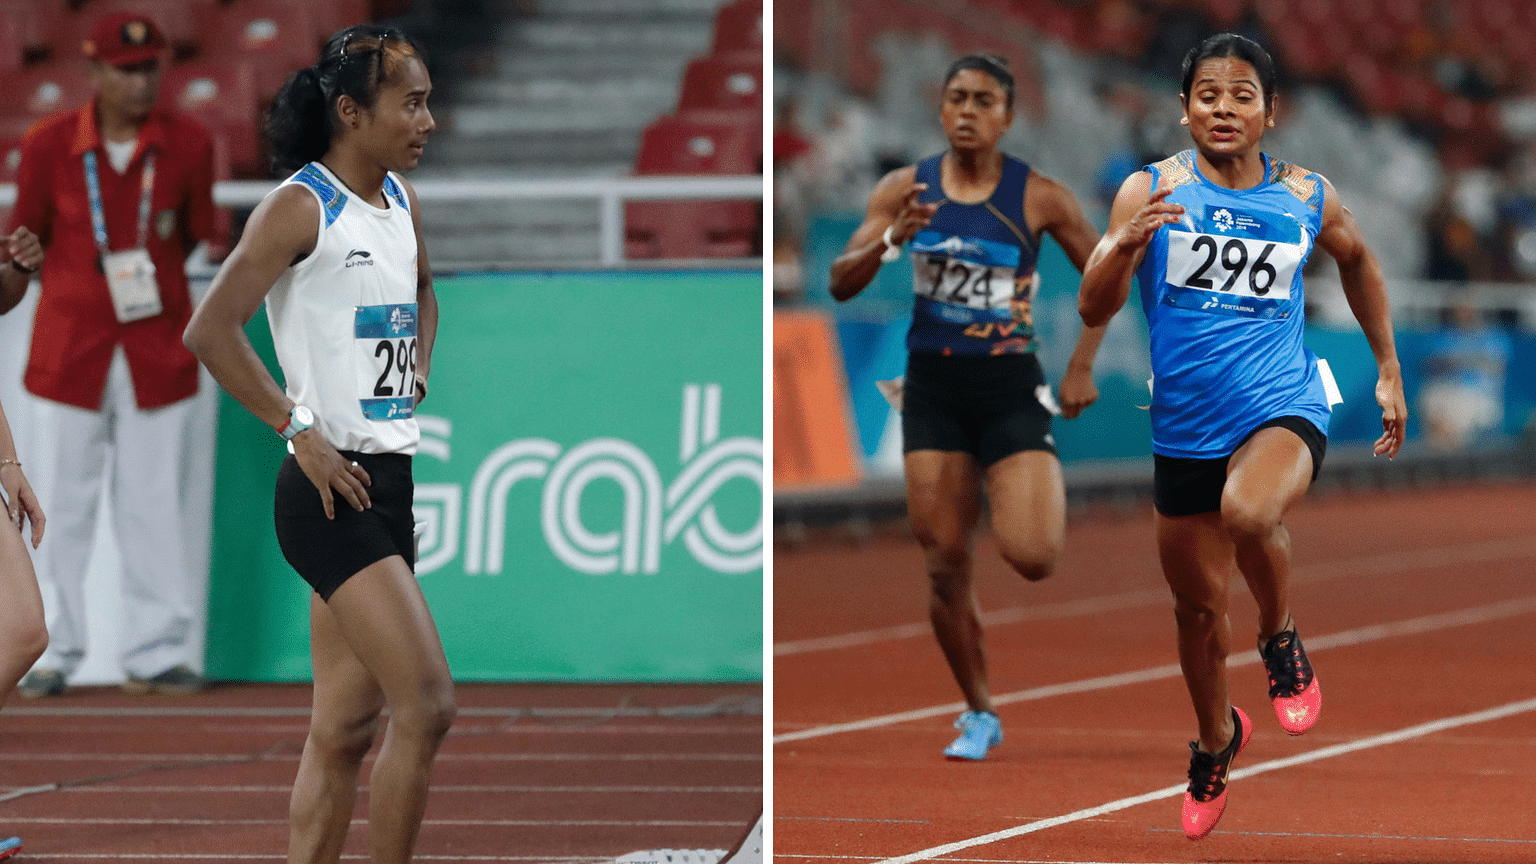 Dutee Chand (left) after her disqualification in women’s 200m semi-final and Dutee Chand during her semi-final.